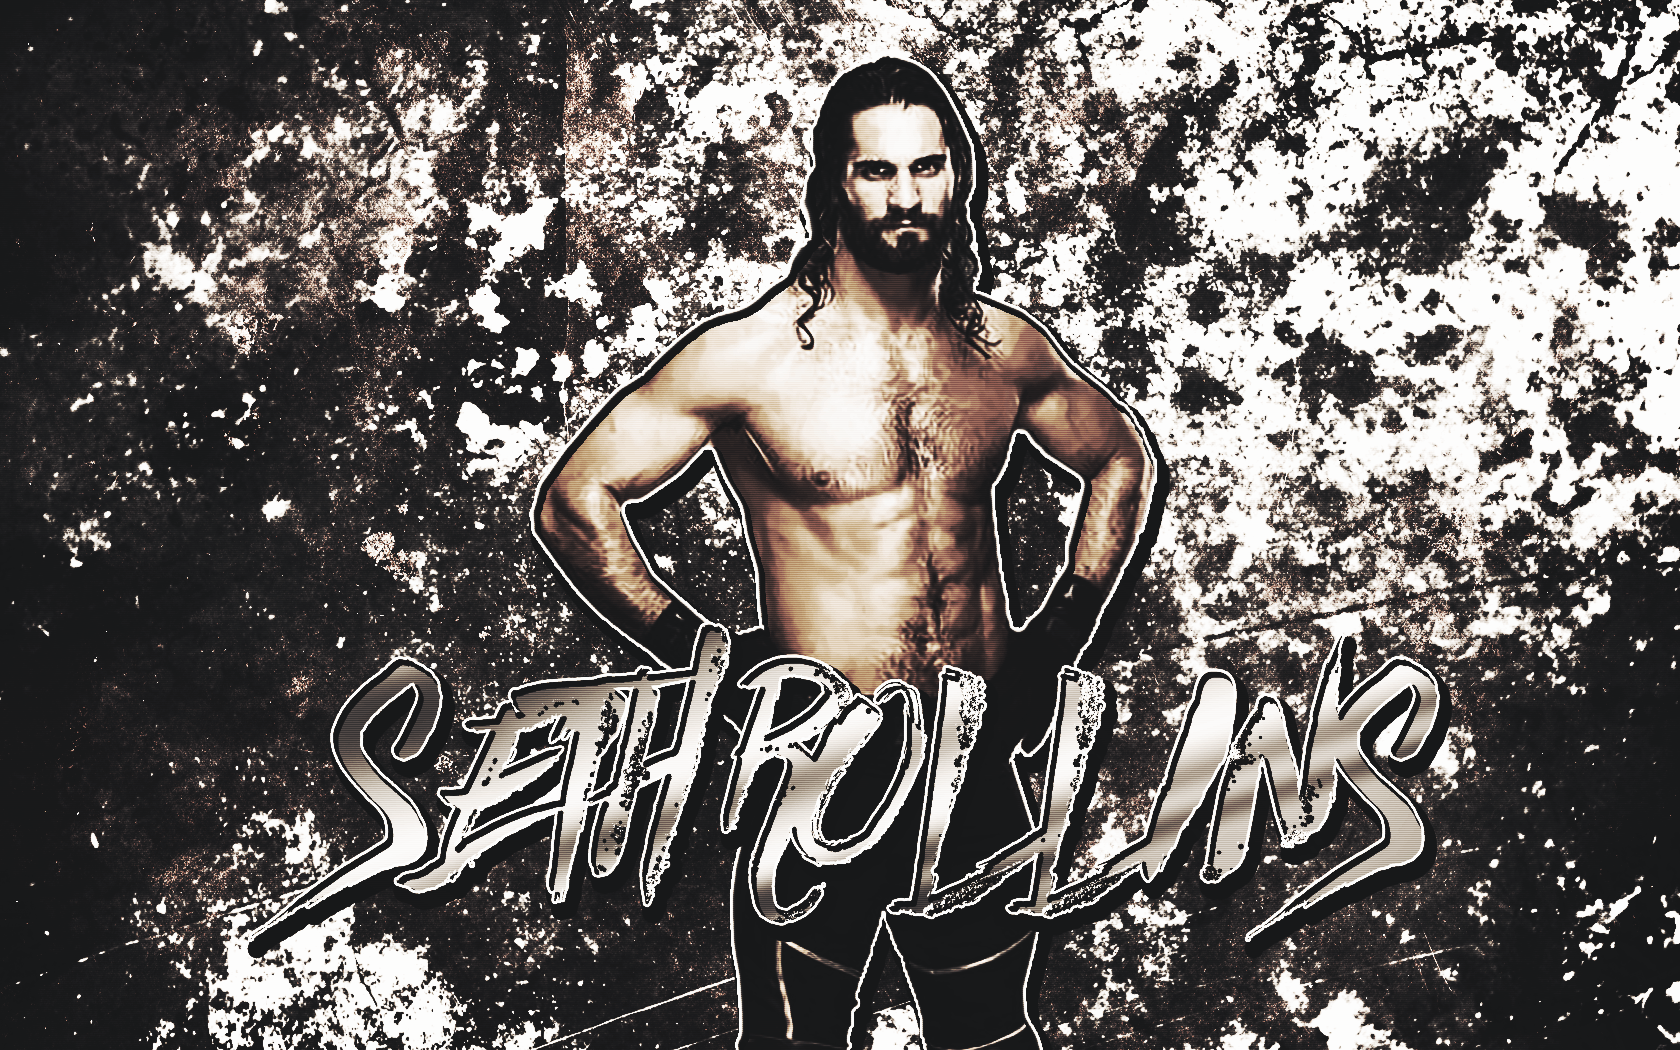 WWE Seth Wallpapers - Wallpaper Cave
